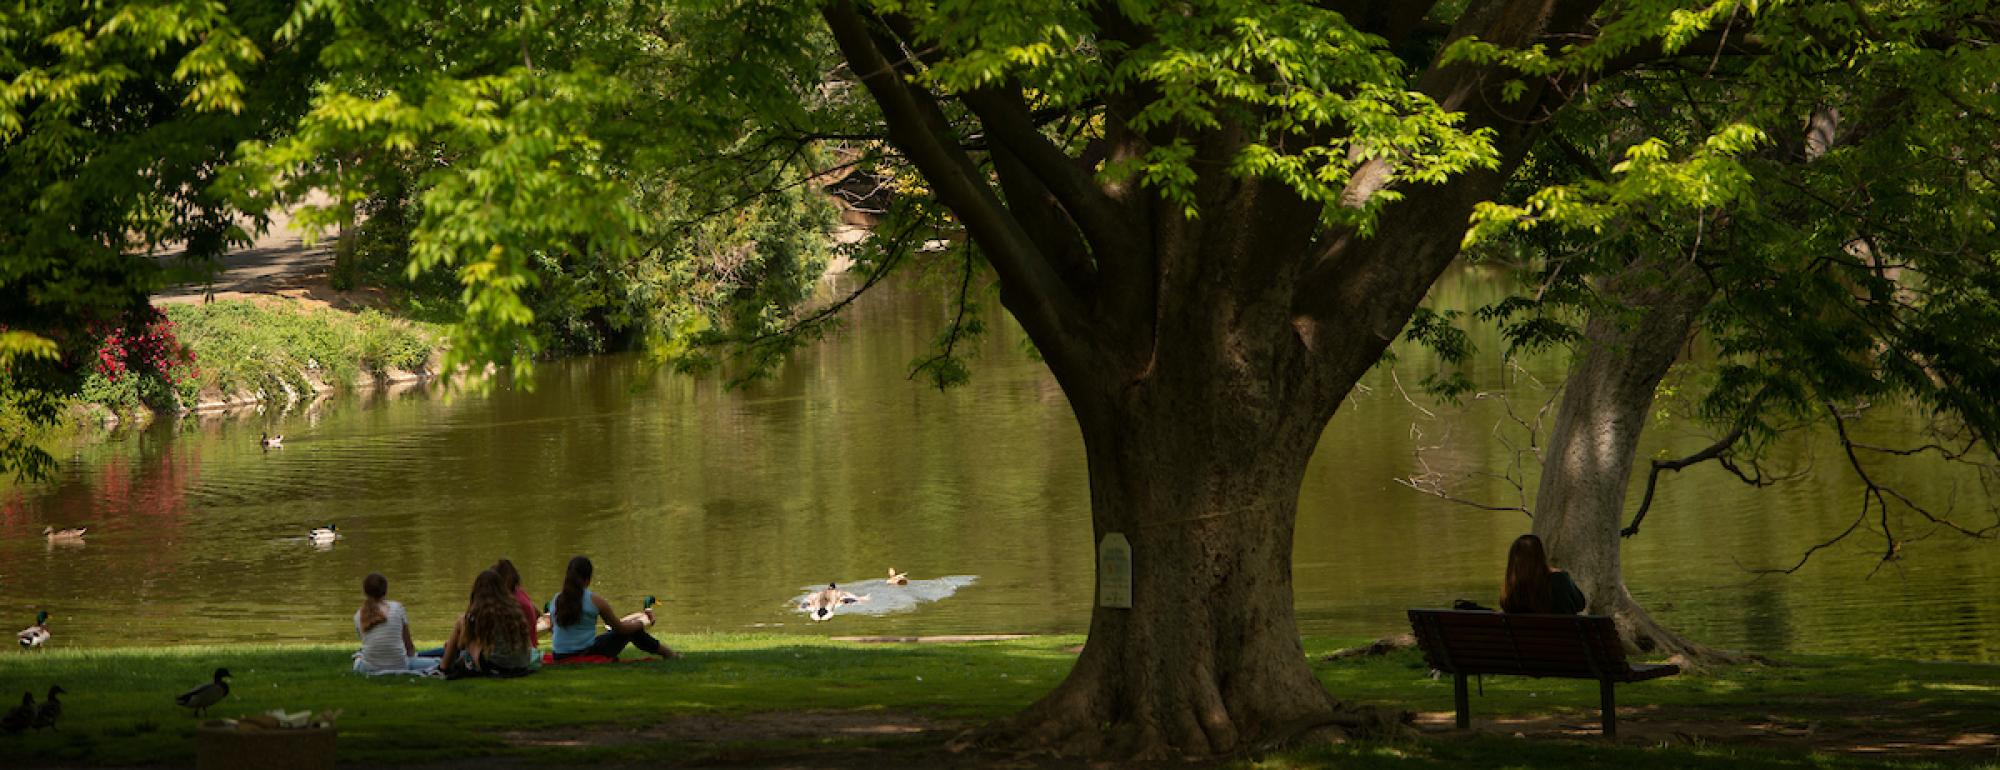 Students relax in the shade of a large tree by Lake Spafford in the Arboretum as ducks swim in the lake on May 1, 2018.  The spring weather is warm for students to study on the grass